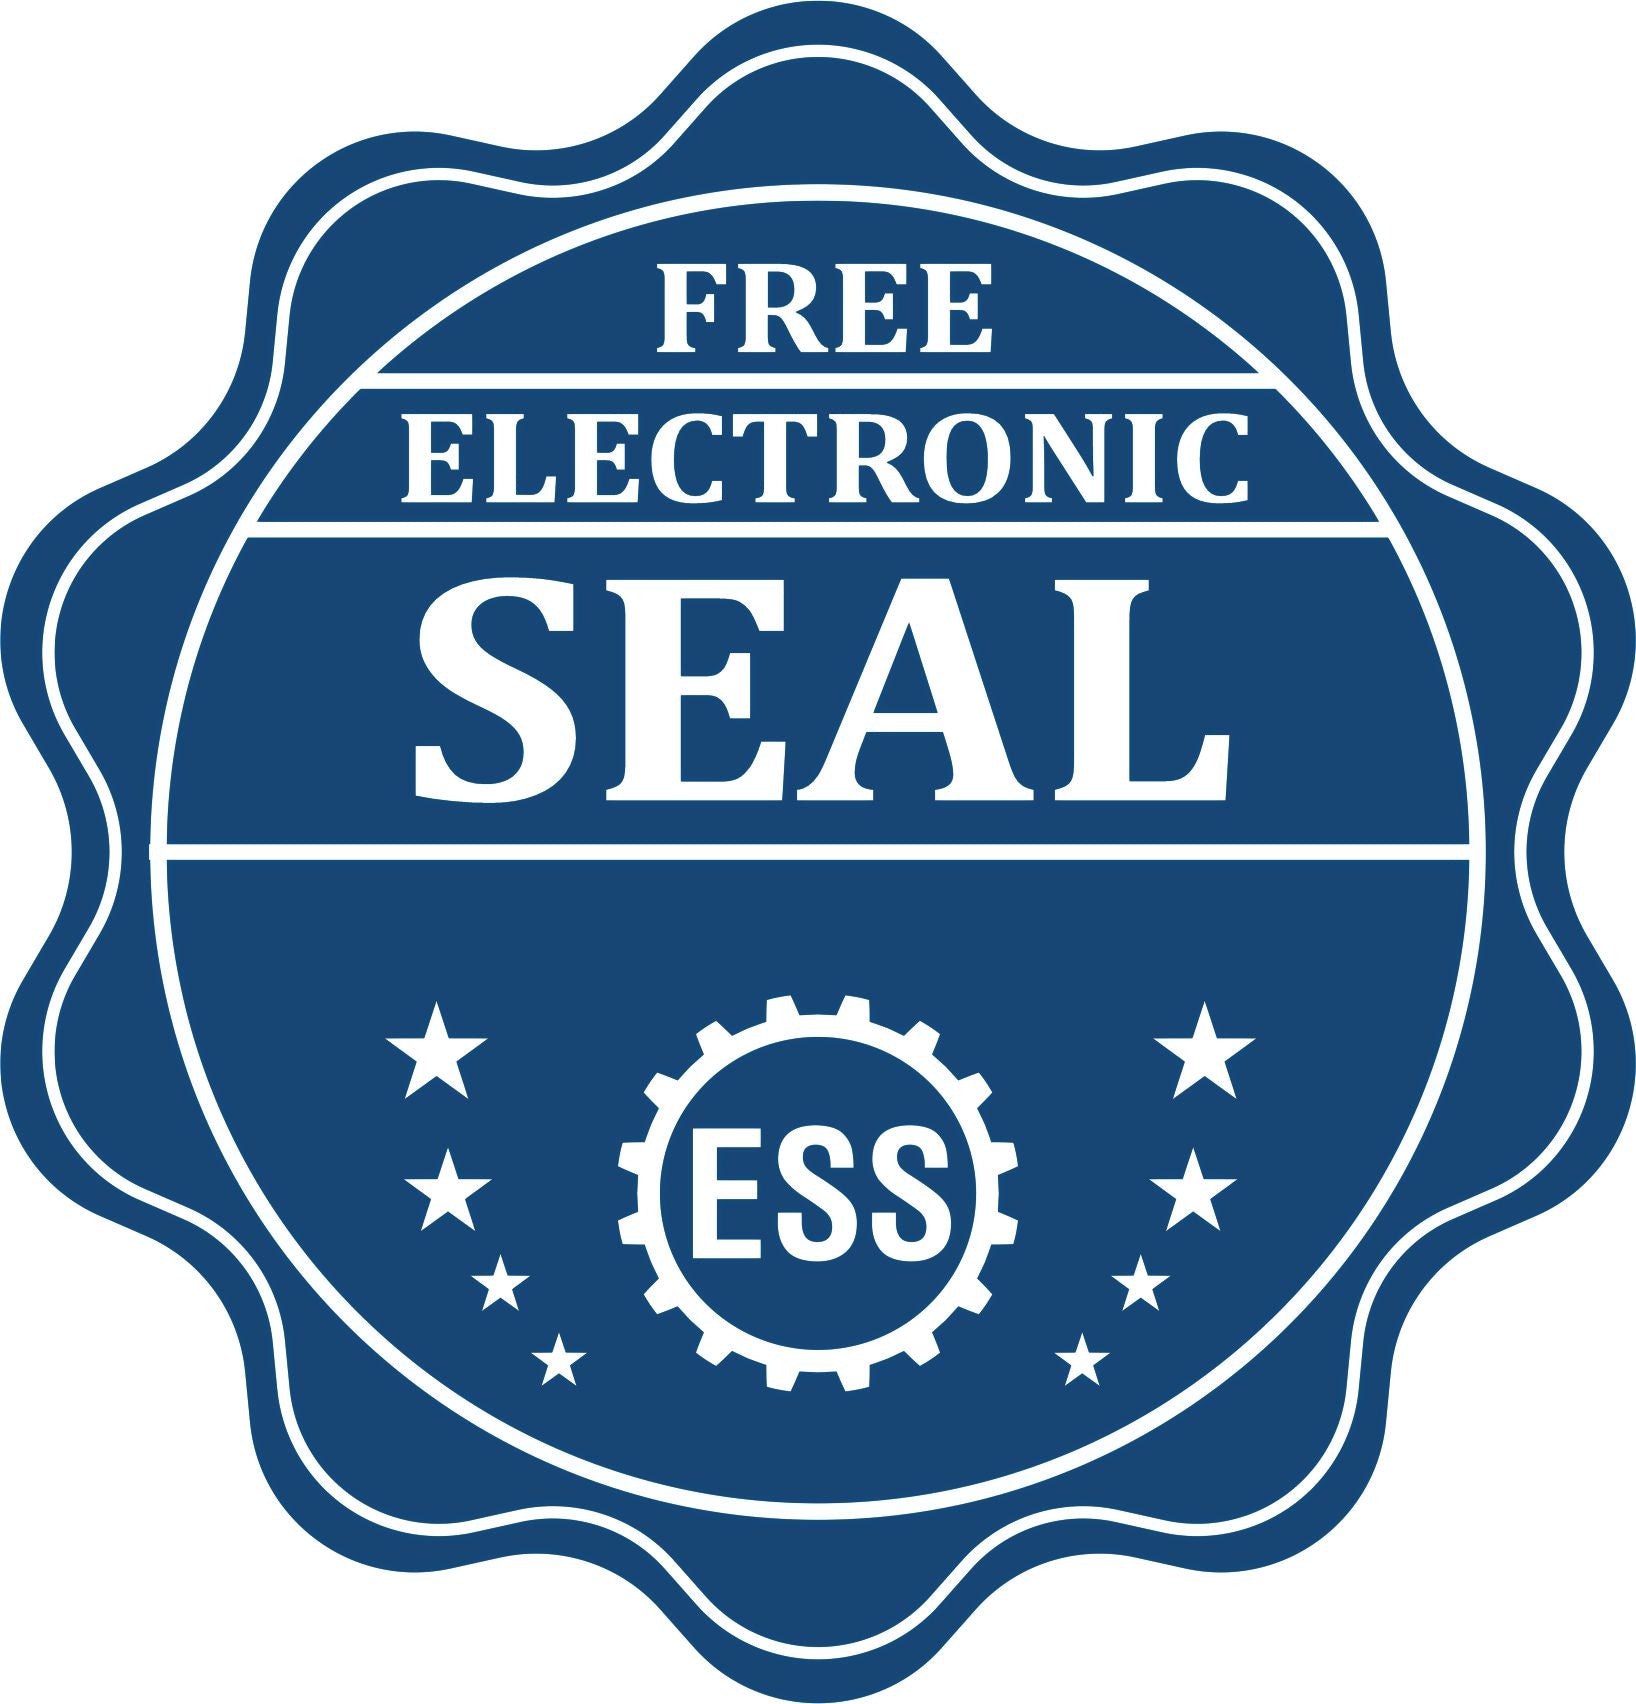 A badge showing a free electronic seal for the New Hampshire Professional Engineer Seal Stamp with stars and the ESS gear on the emblem.